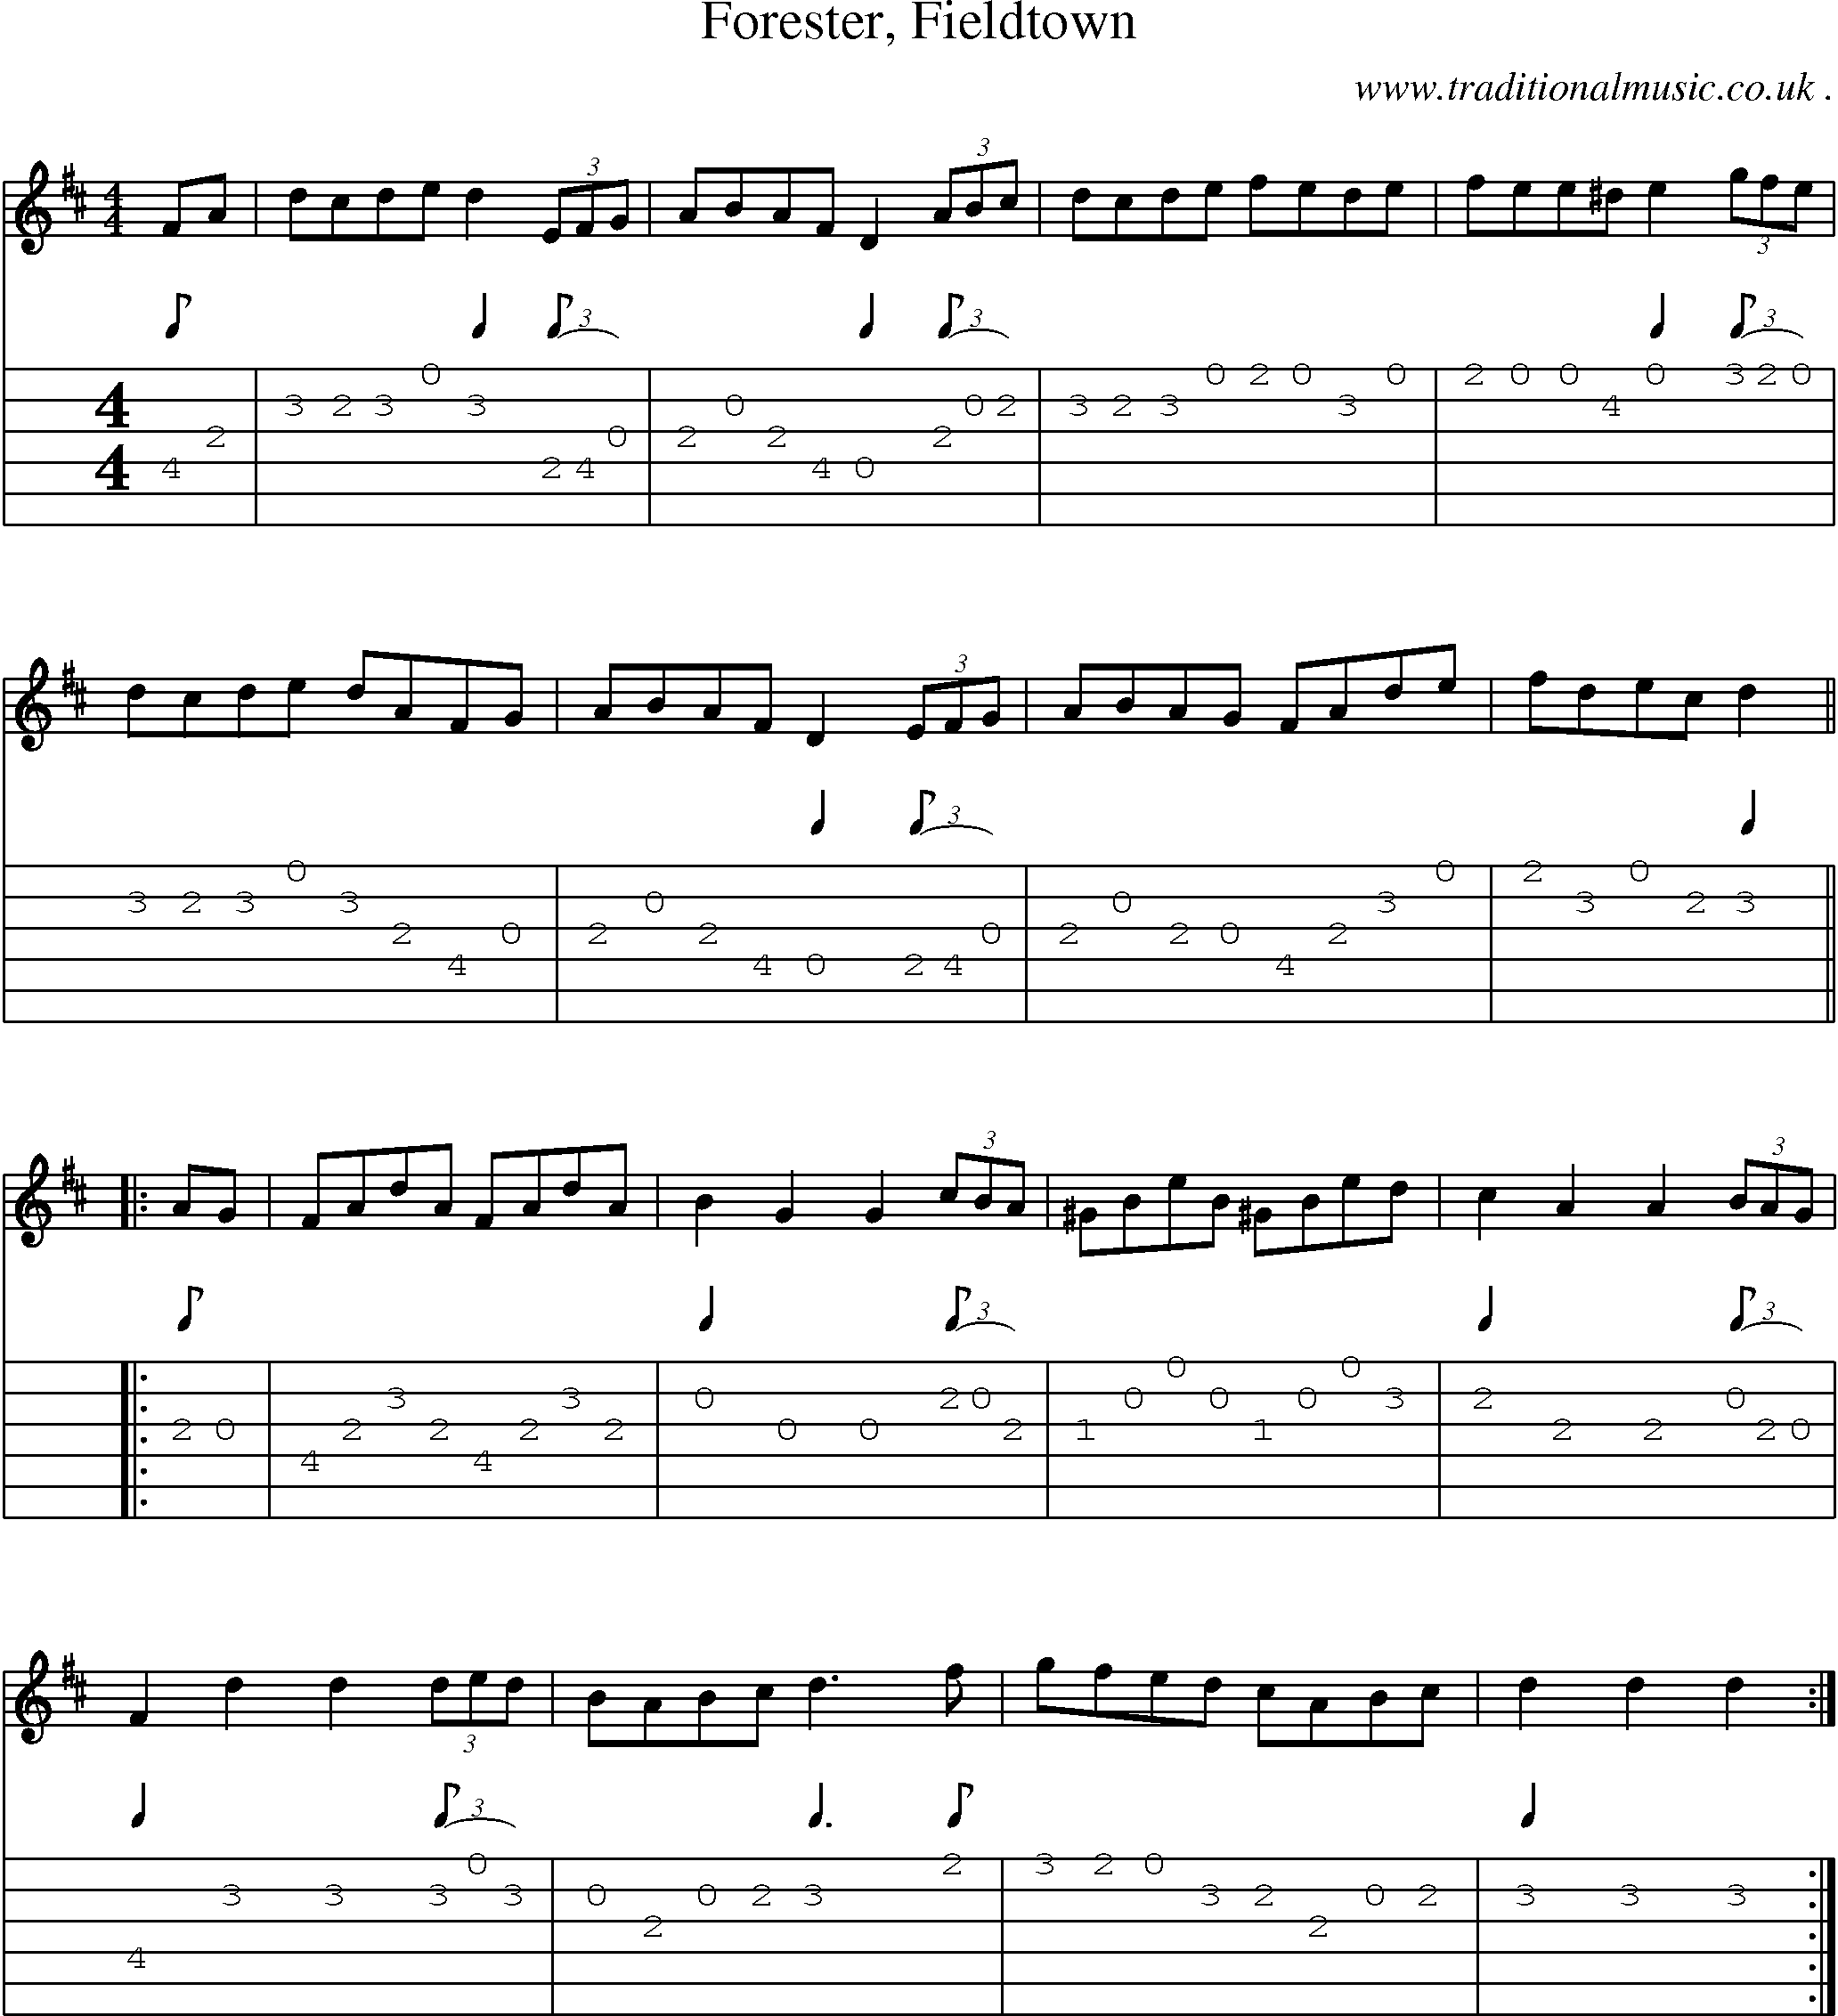 Sheet-Music and Guitar Tabs for Forester Fieldtown